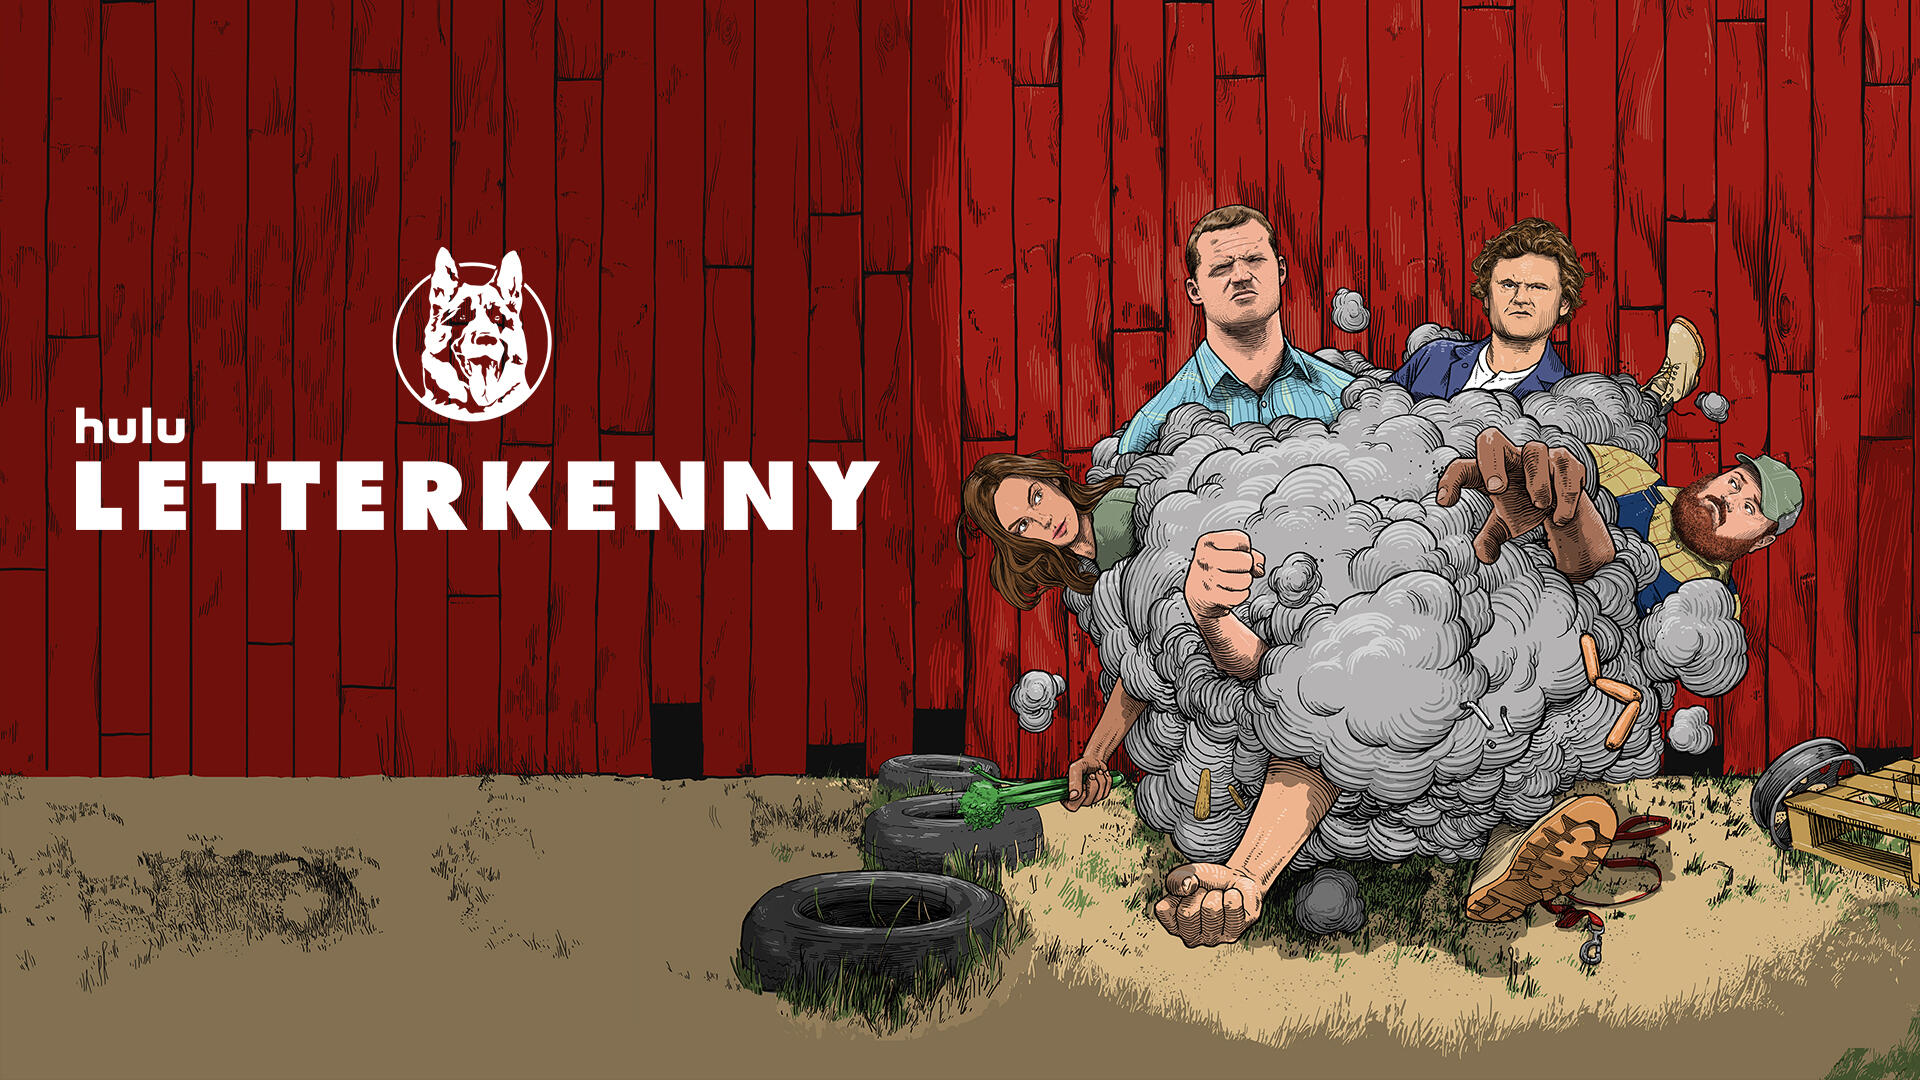 Letterkenny -- The residents of Letterkenny belong to one of three groups: the Hicks, the Skids, and the Hockey Players, who are constantly feuding with each other over seemingly trivial matters that often end with someone getting their ass kicked. In season 10, McMurray and Wayne do some dickering, the Hicks attend a sausage party, the Hockey Players and Skids have a video game battle, the men of Letterkenny receive head to toe physicals…and that’s just for starters, buddy. (Courtesy of Hulu)